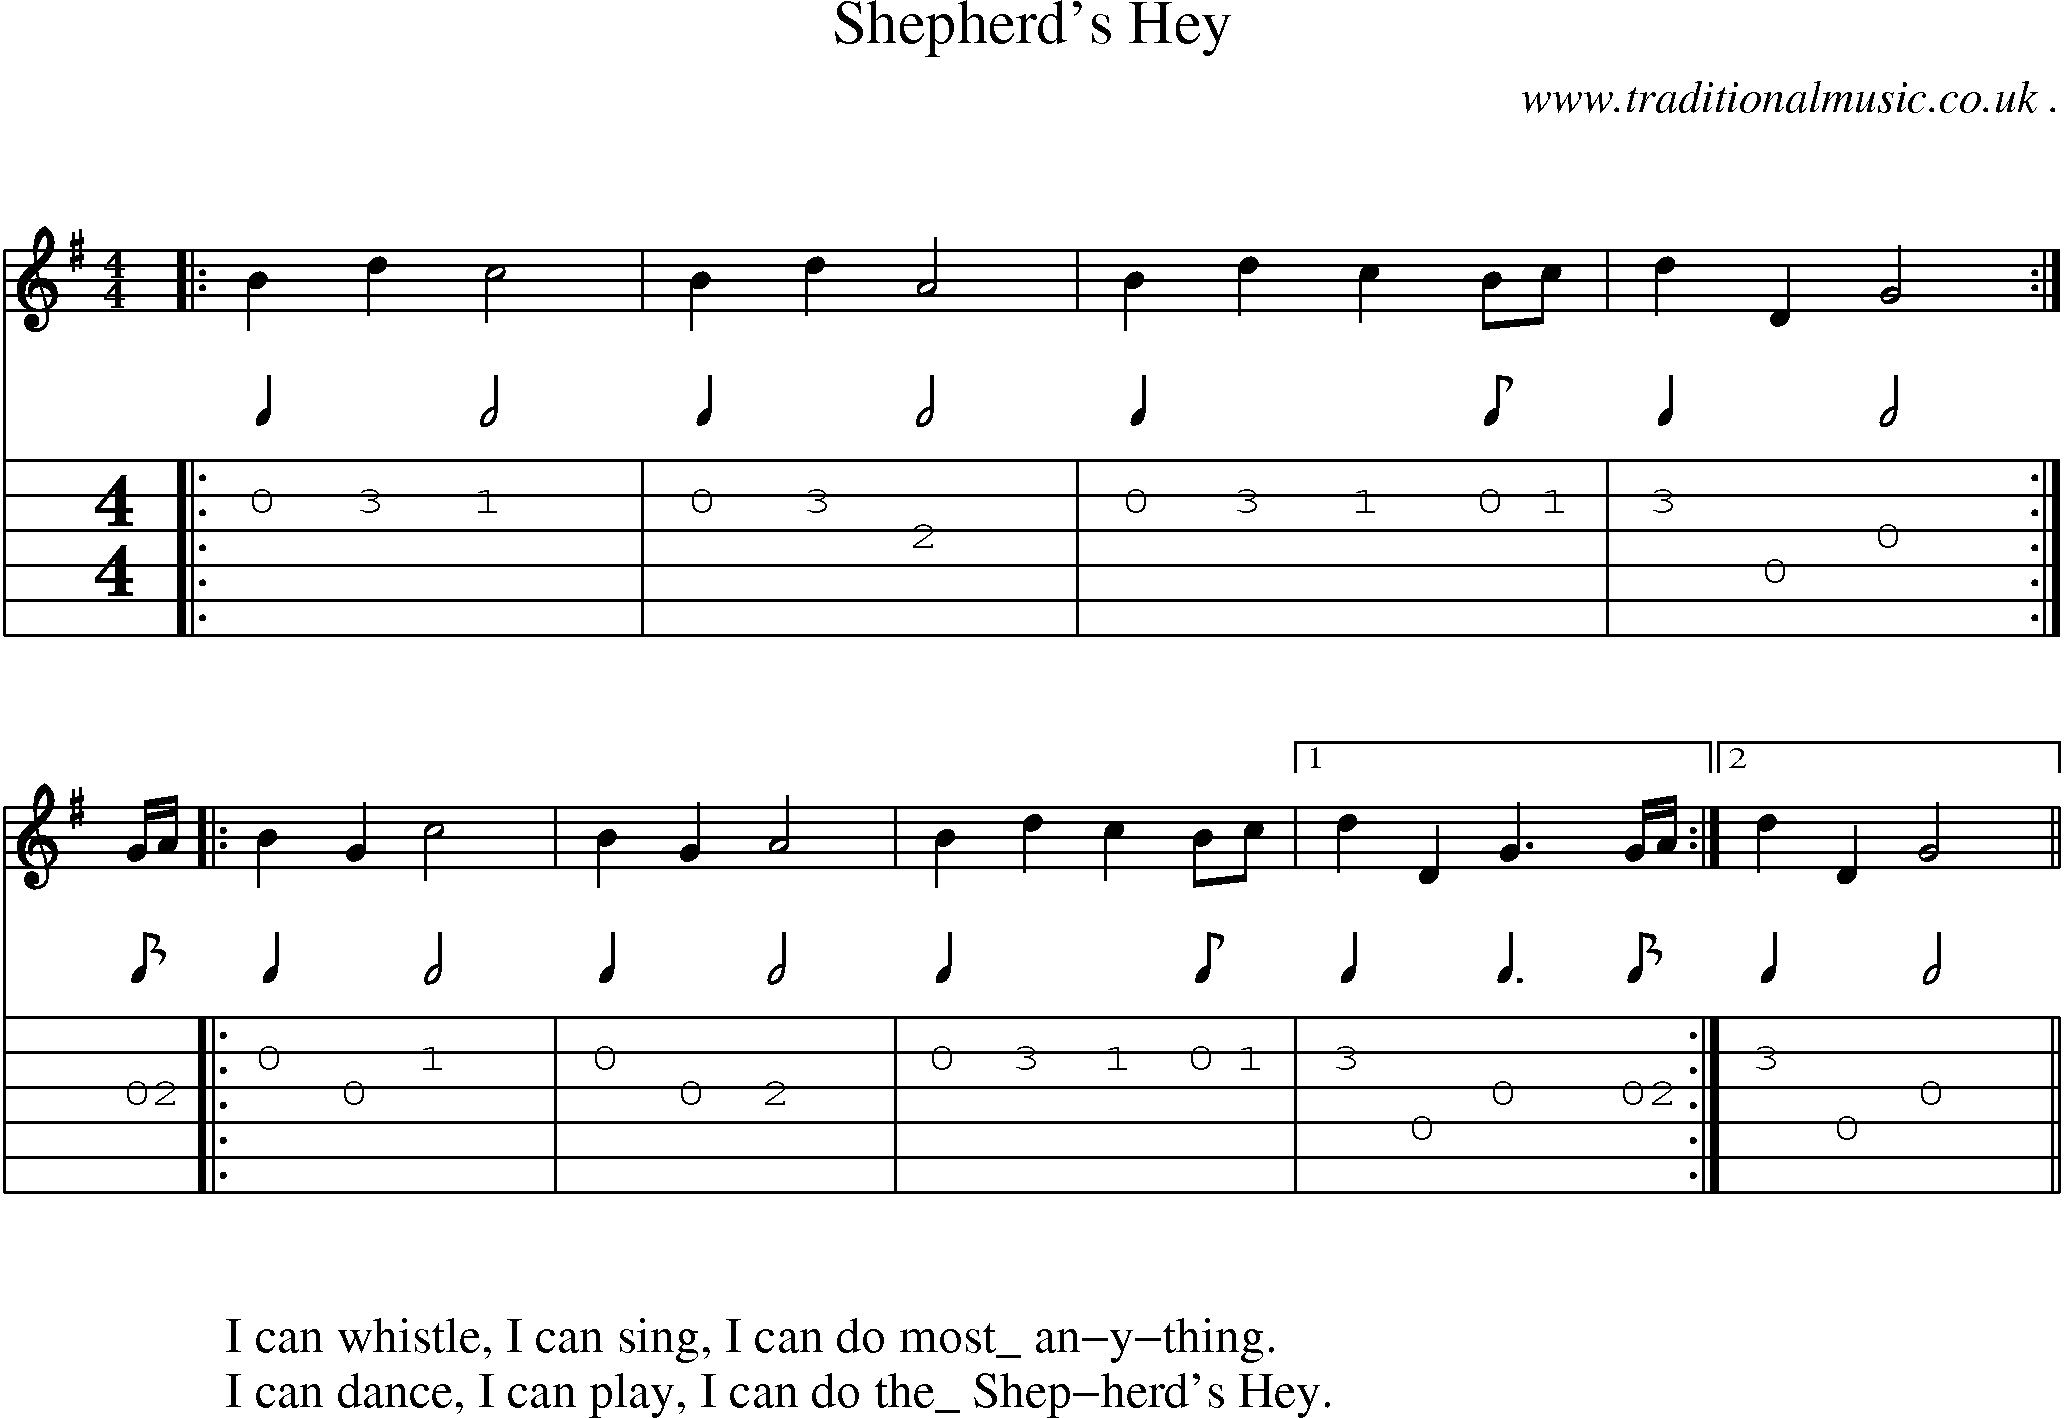 Sheet-Music and Guitar Tabs for Shepherds Hey